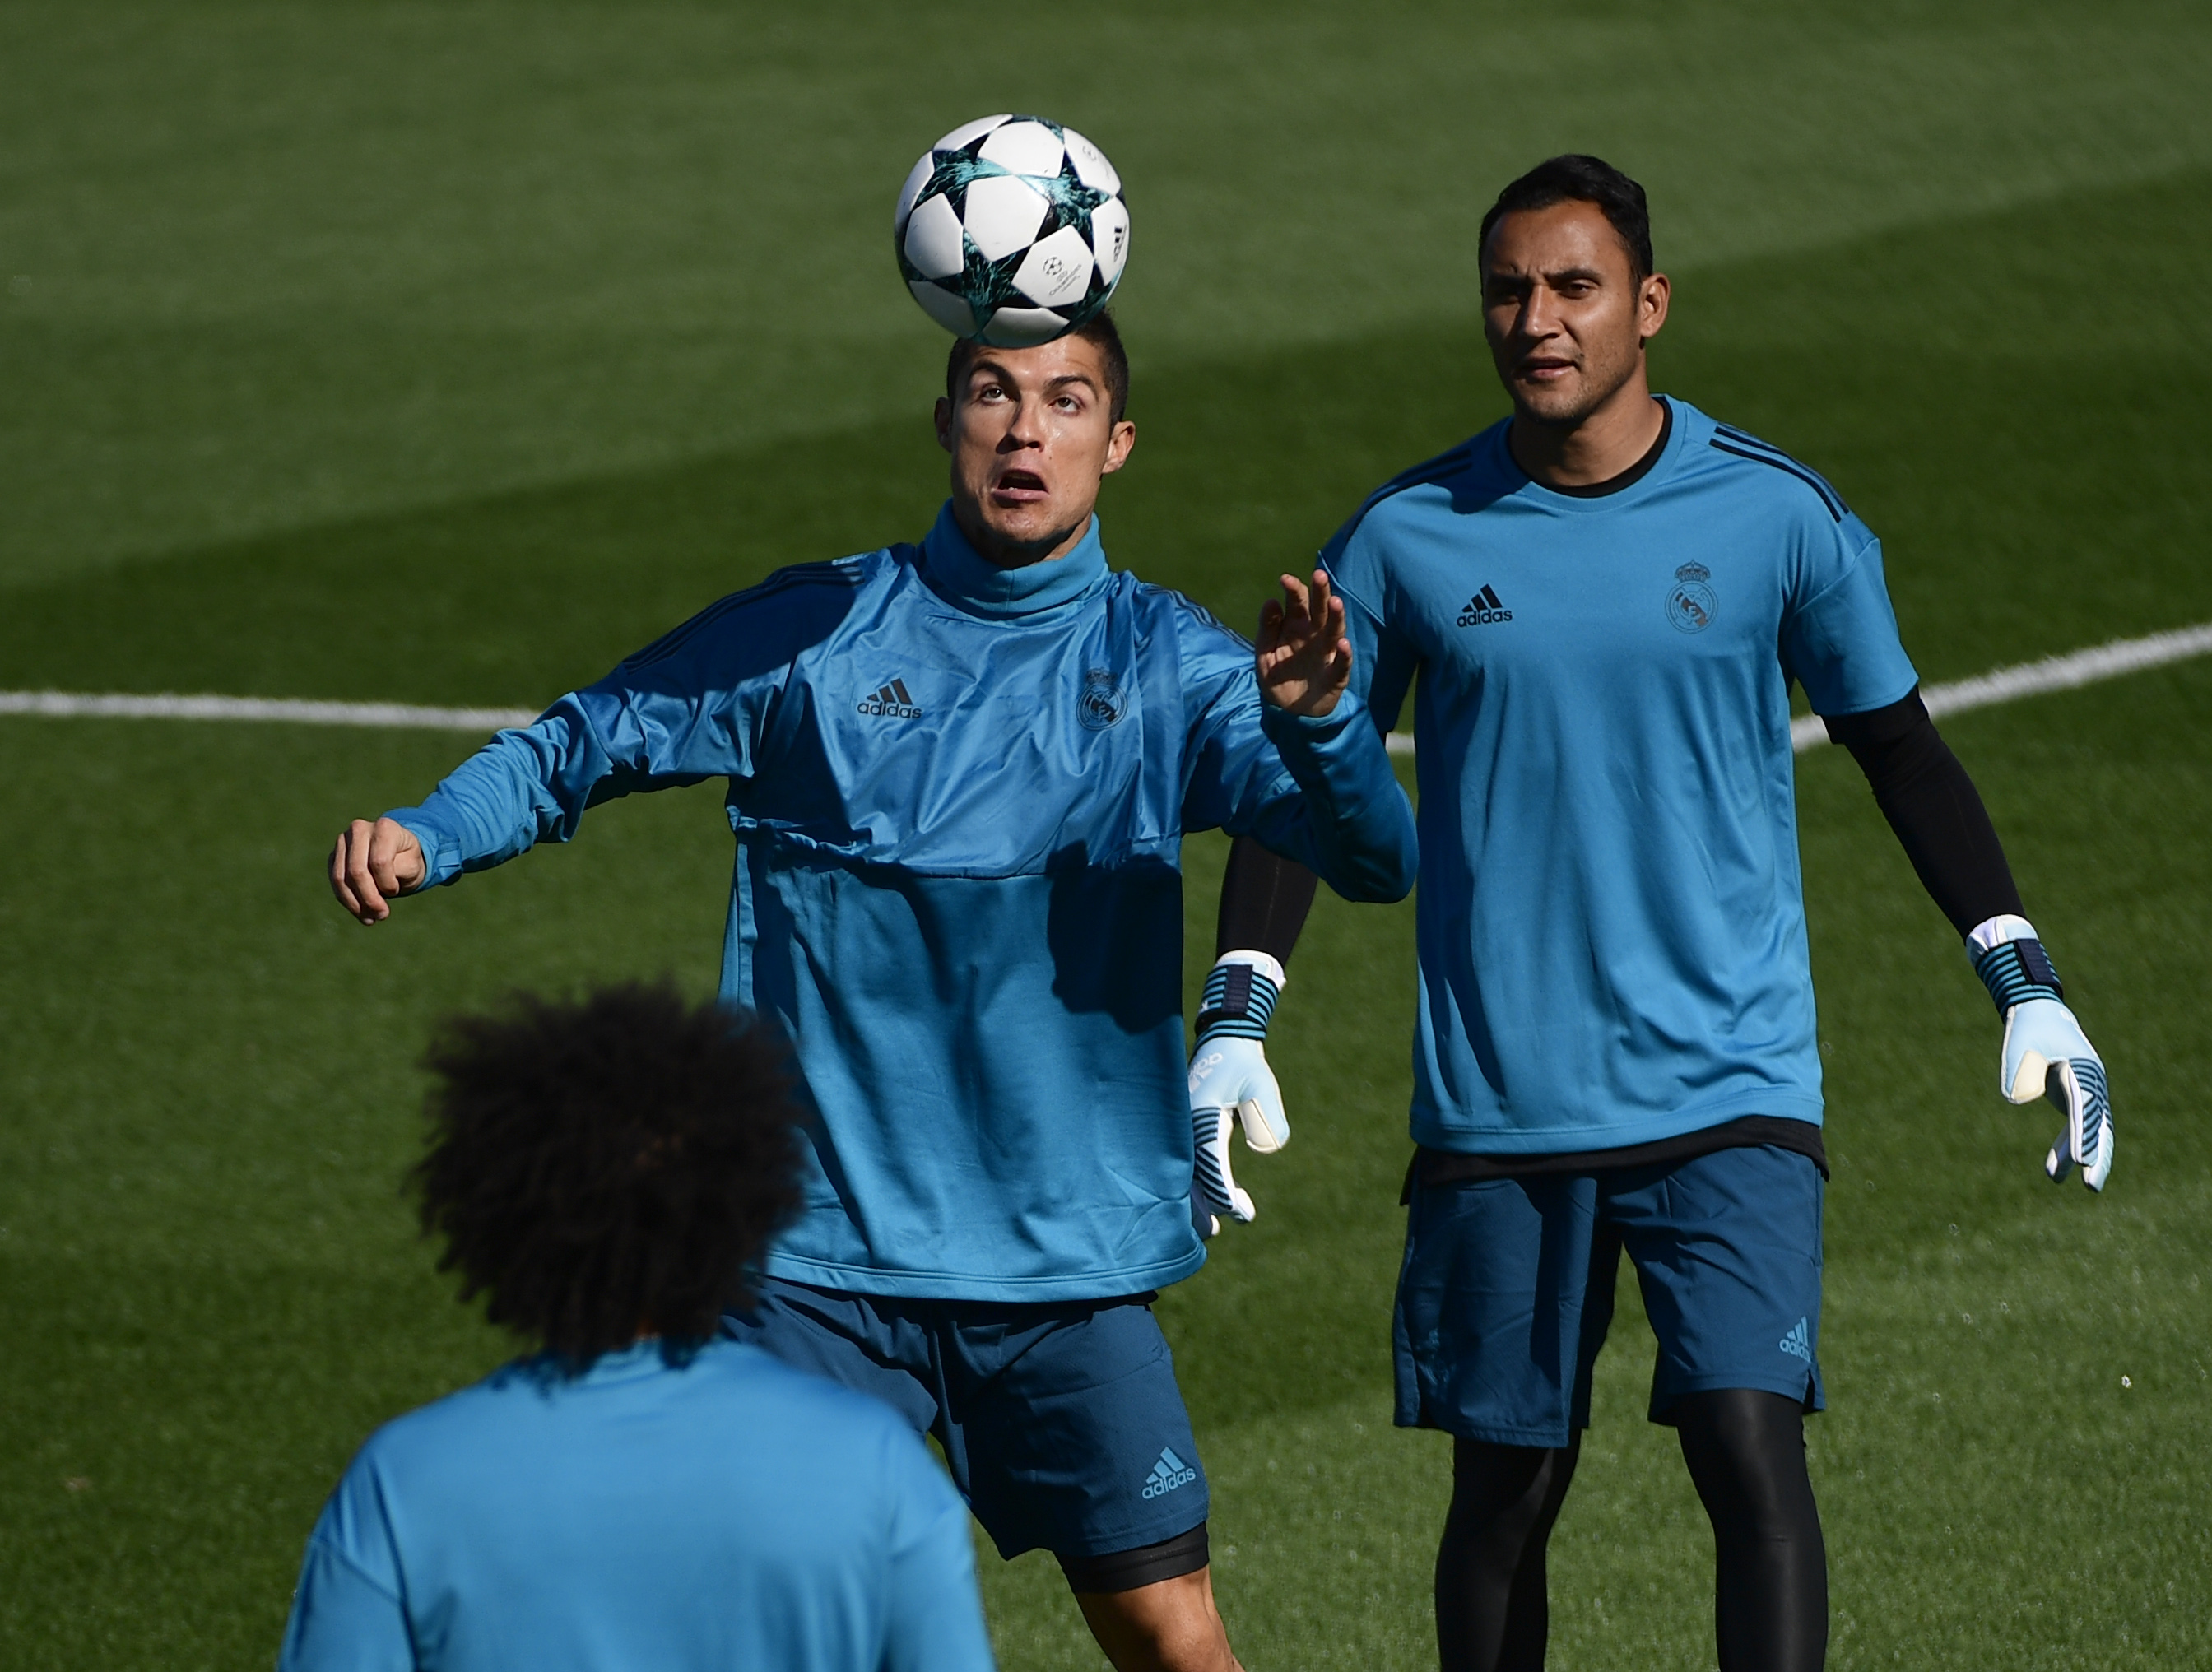 Real Madrid's Portuguese forward Cristiano Ronaldo (L) and Real Madrid's Costa Rican goalkeeper Keylor Navas attends a training session at the Valdebebas Sport City, in Madrid, on September 12, 2017 on the eve of the UEFA Champions League Group H football match Real Madrid CF vs Apoel FC.
 / AFP PHOTO / PIERRE-PHILIPPE MARCOU        (Photo credit should read PIERRE-PHILIPPE MARCOU/AFP/Getty Images)